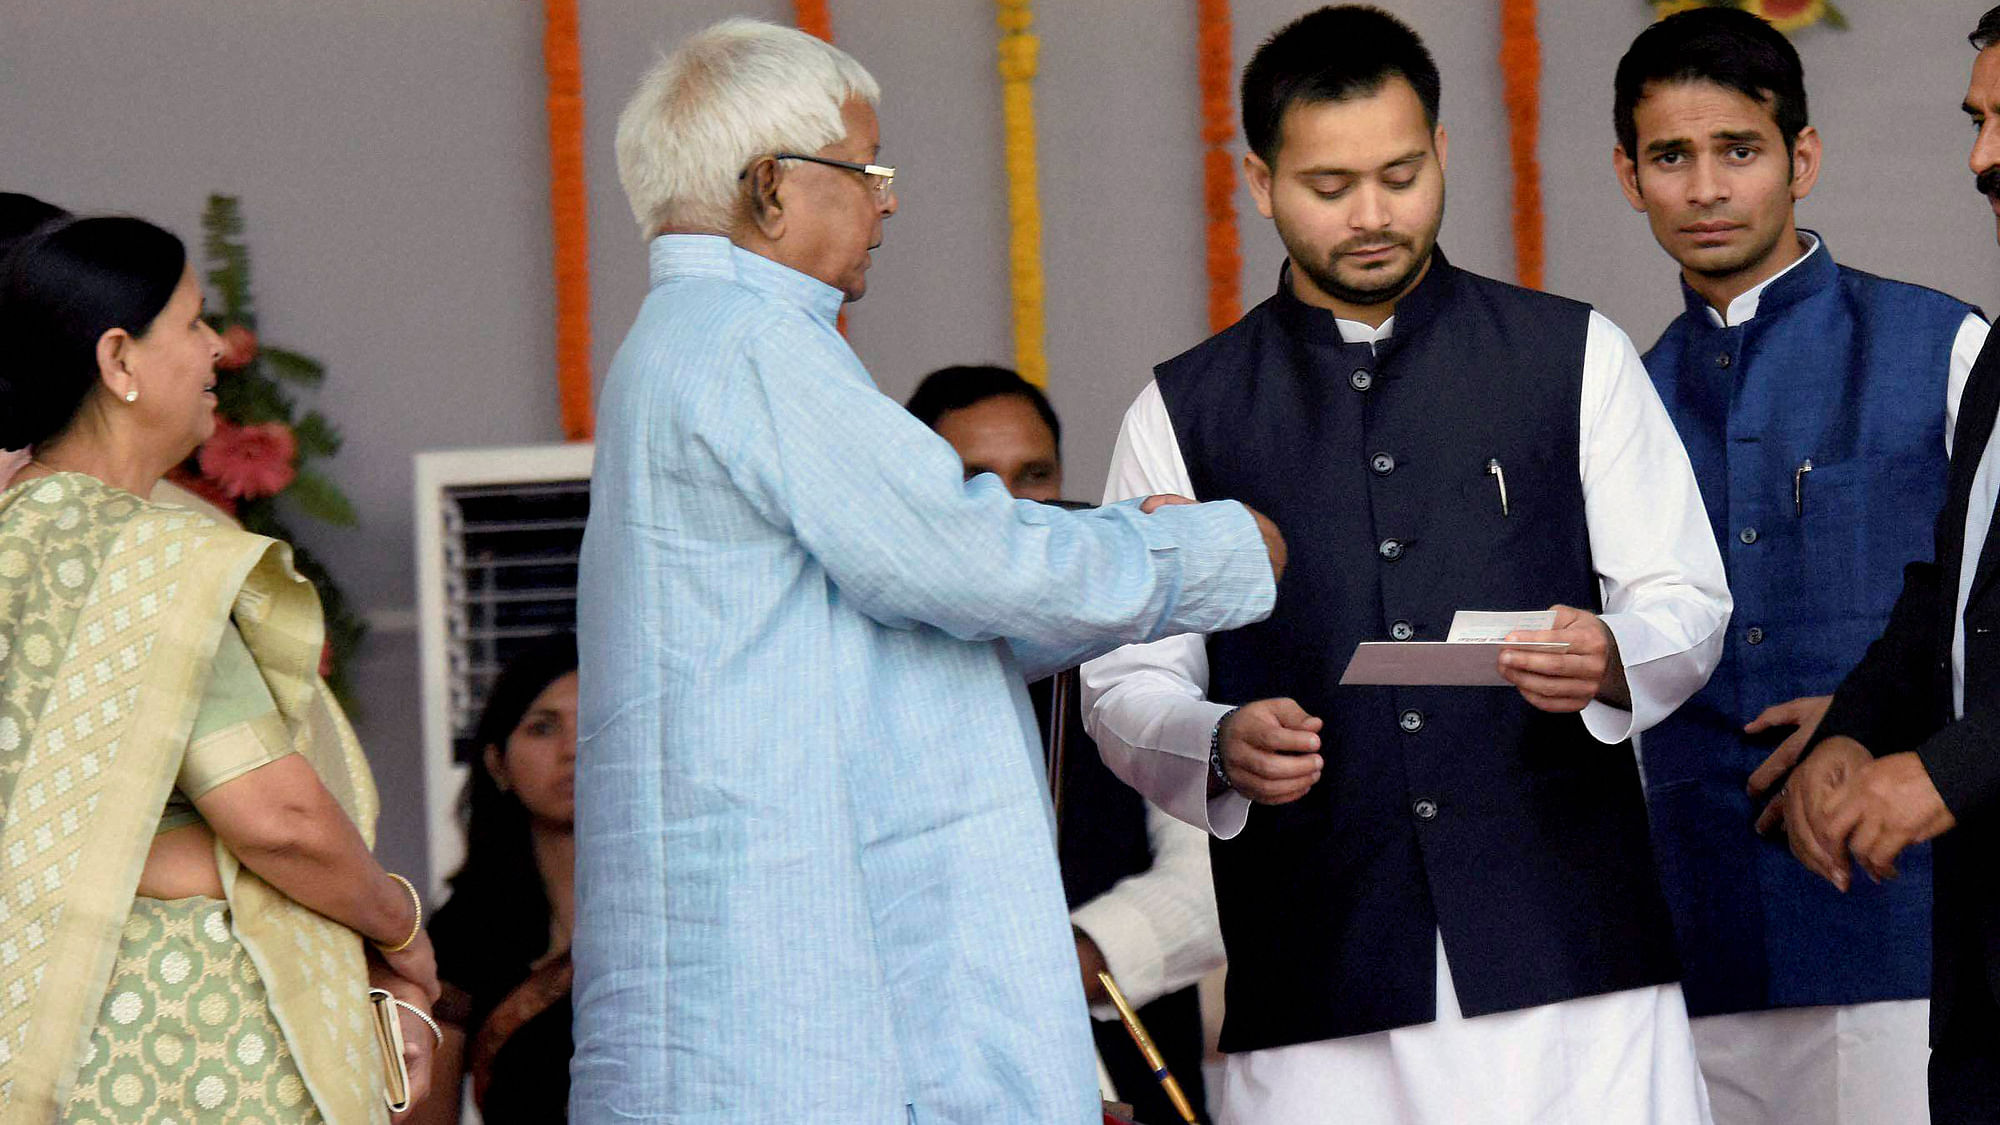 RJD chief Lalu Prasad with his wife Rabri Devi and his sons during the swearing-in ceremony at Gandhi Maidan in Patna on Friday. (Photo: PTI)